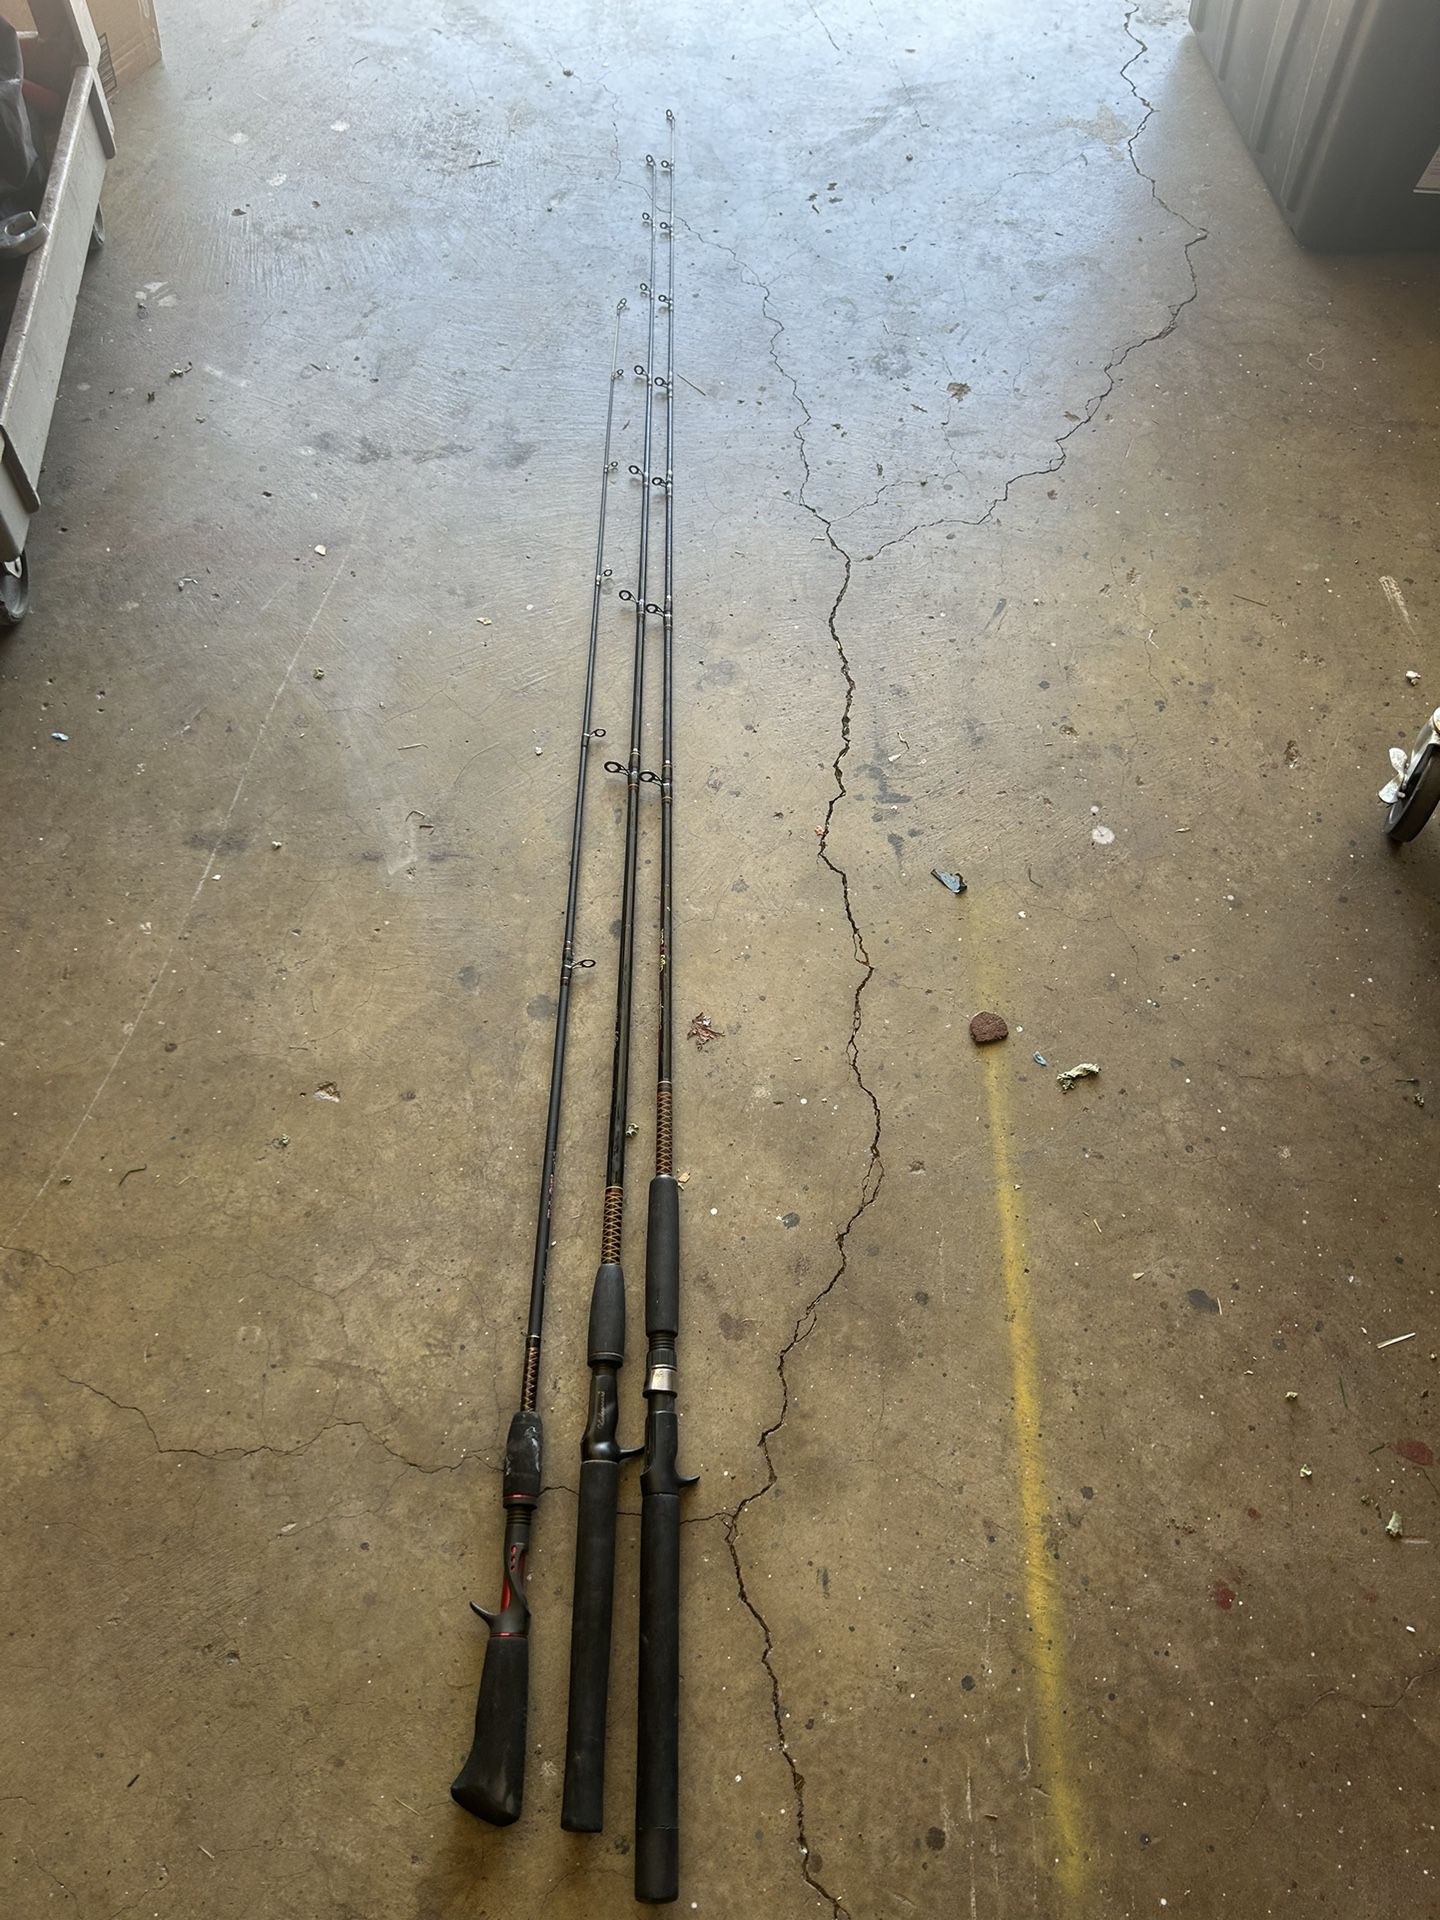 Ugly Stick Fishing Rods 